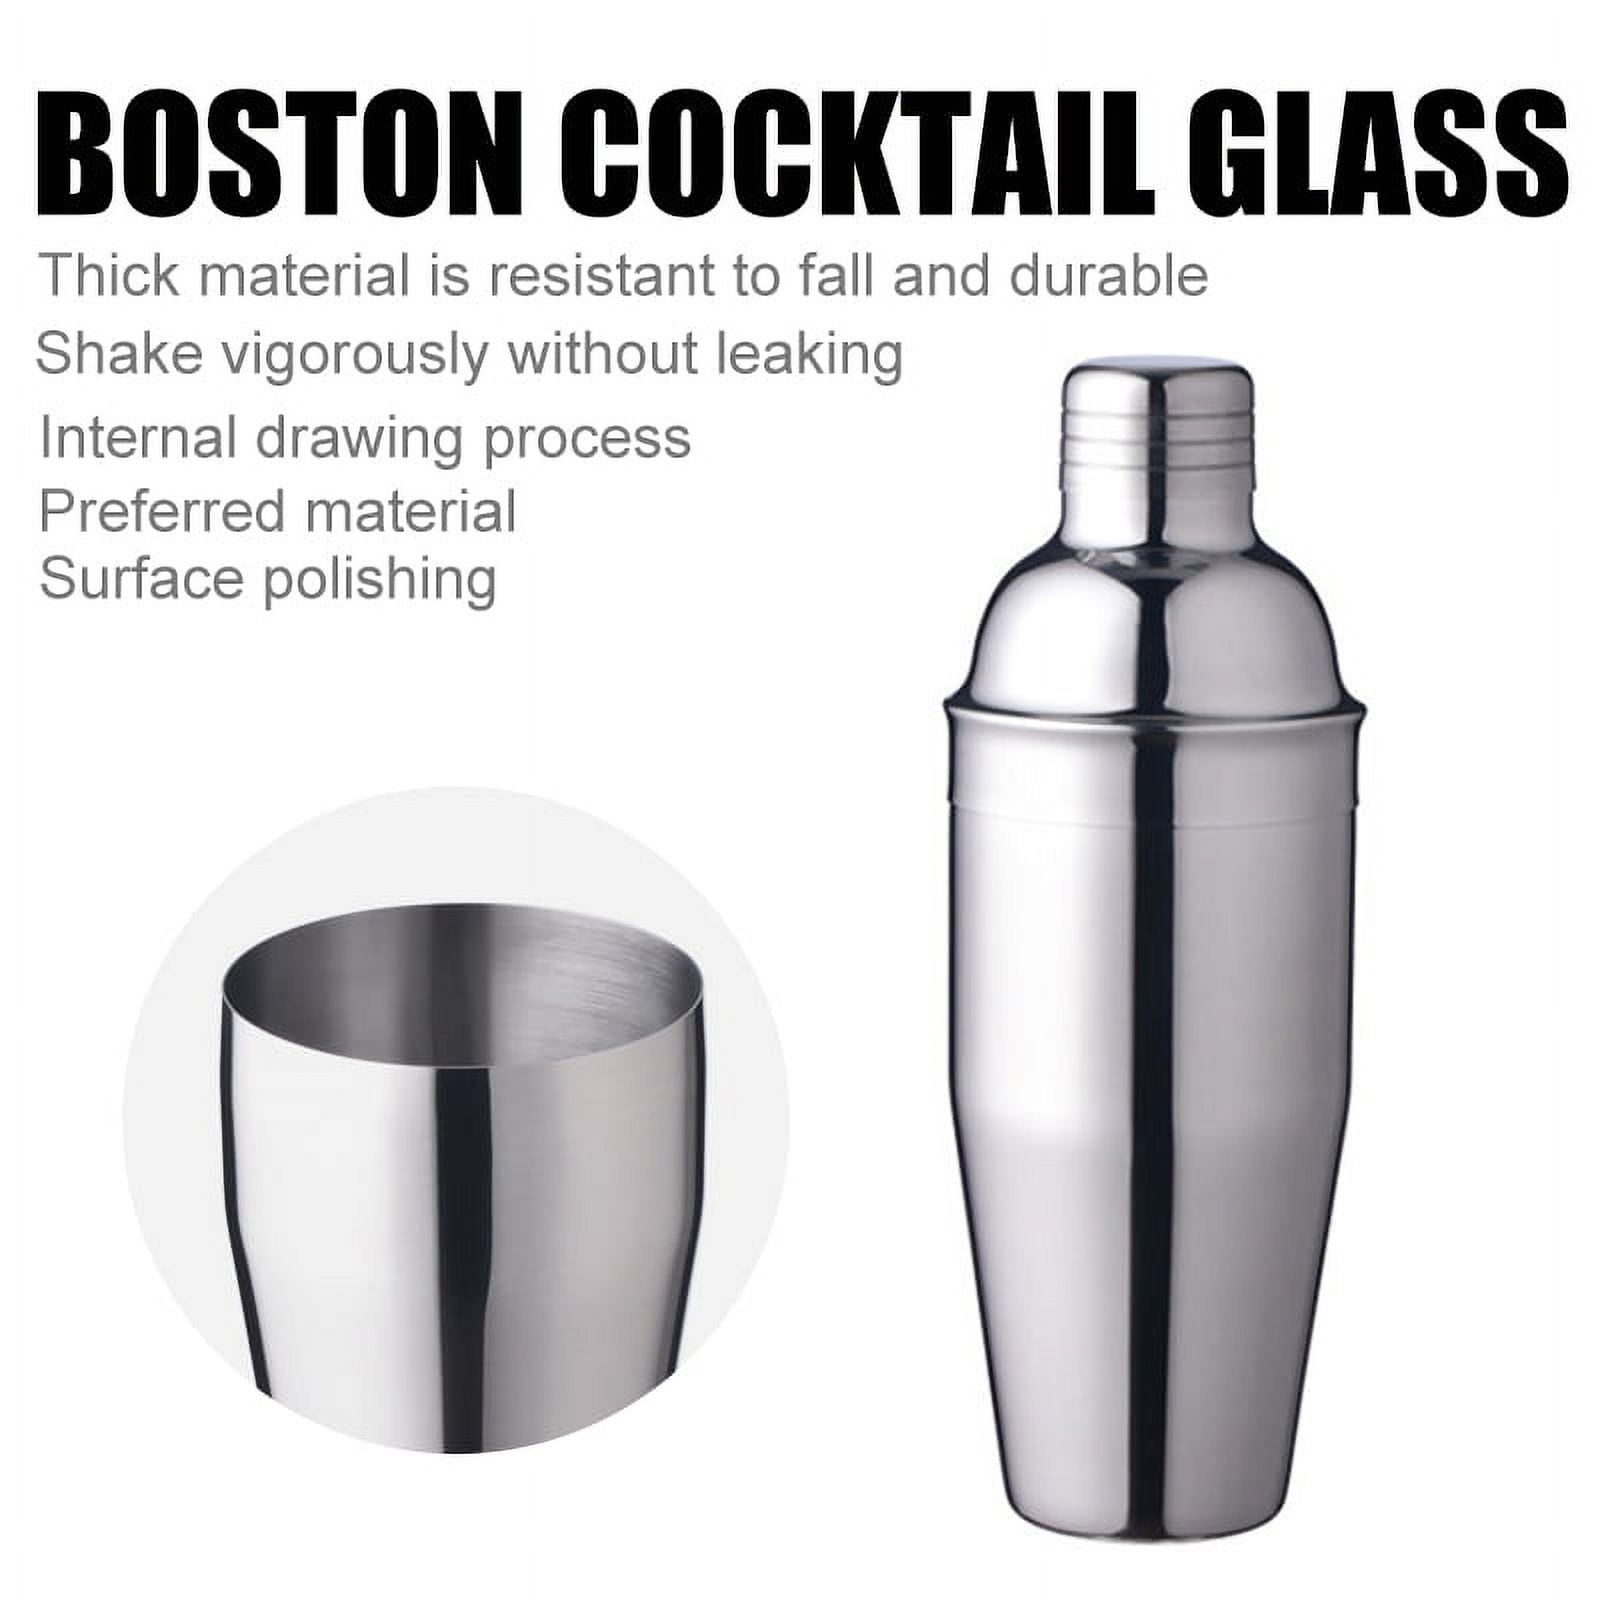 OXO Stainless Steel Cocktail/Martini Shaker Drink Mixer Kit